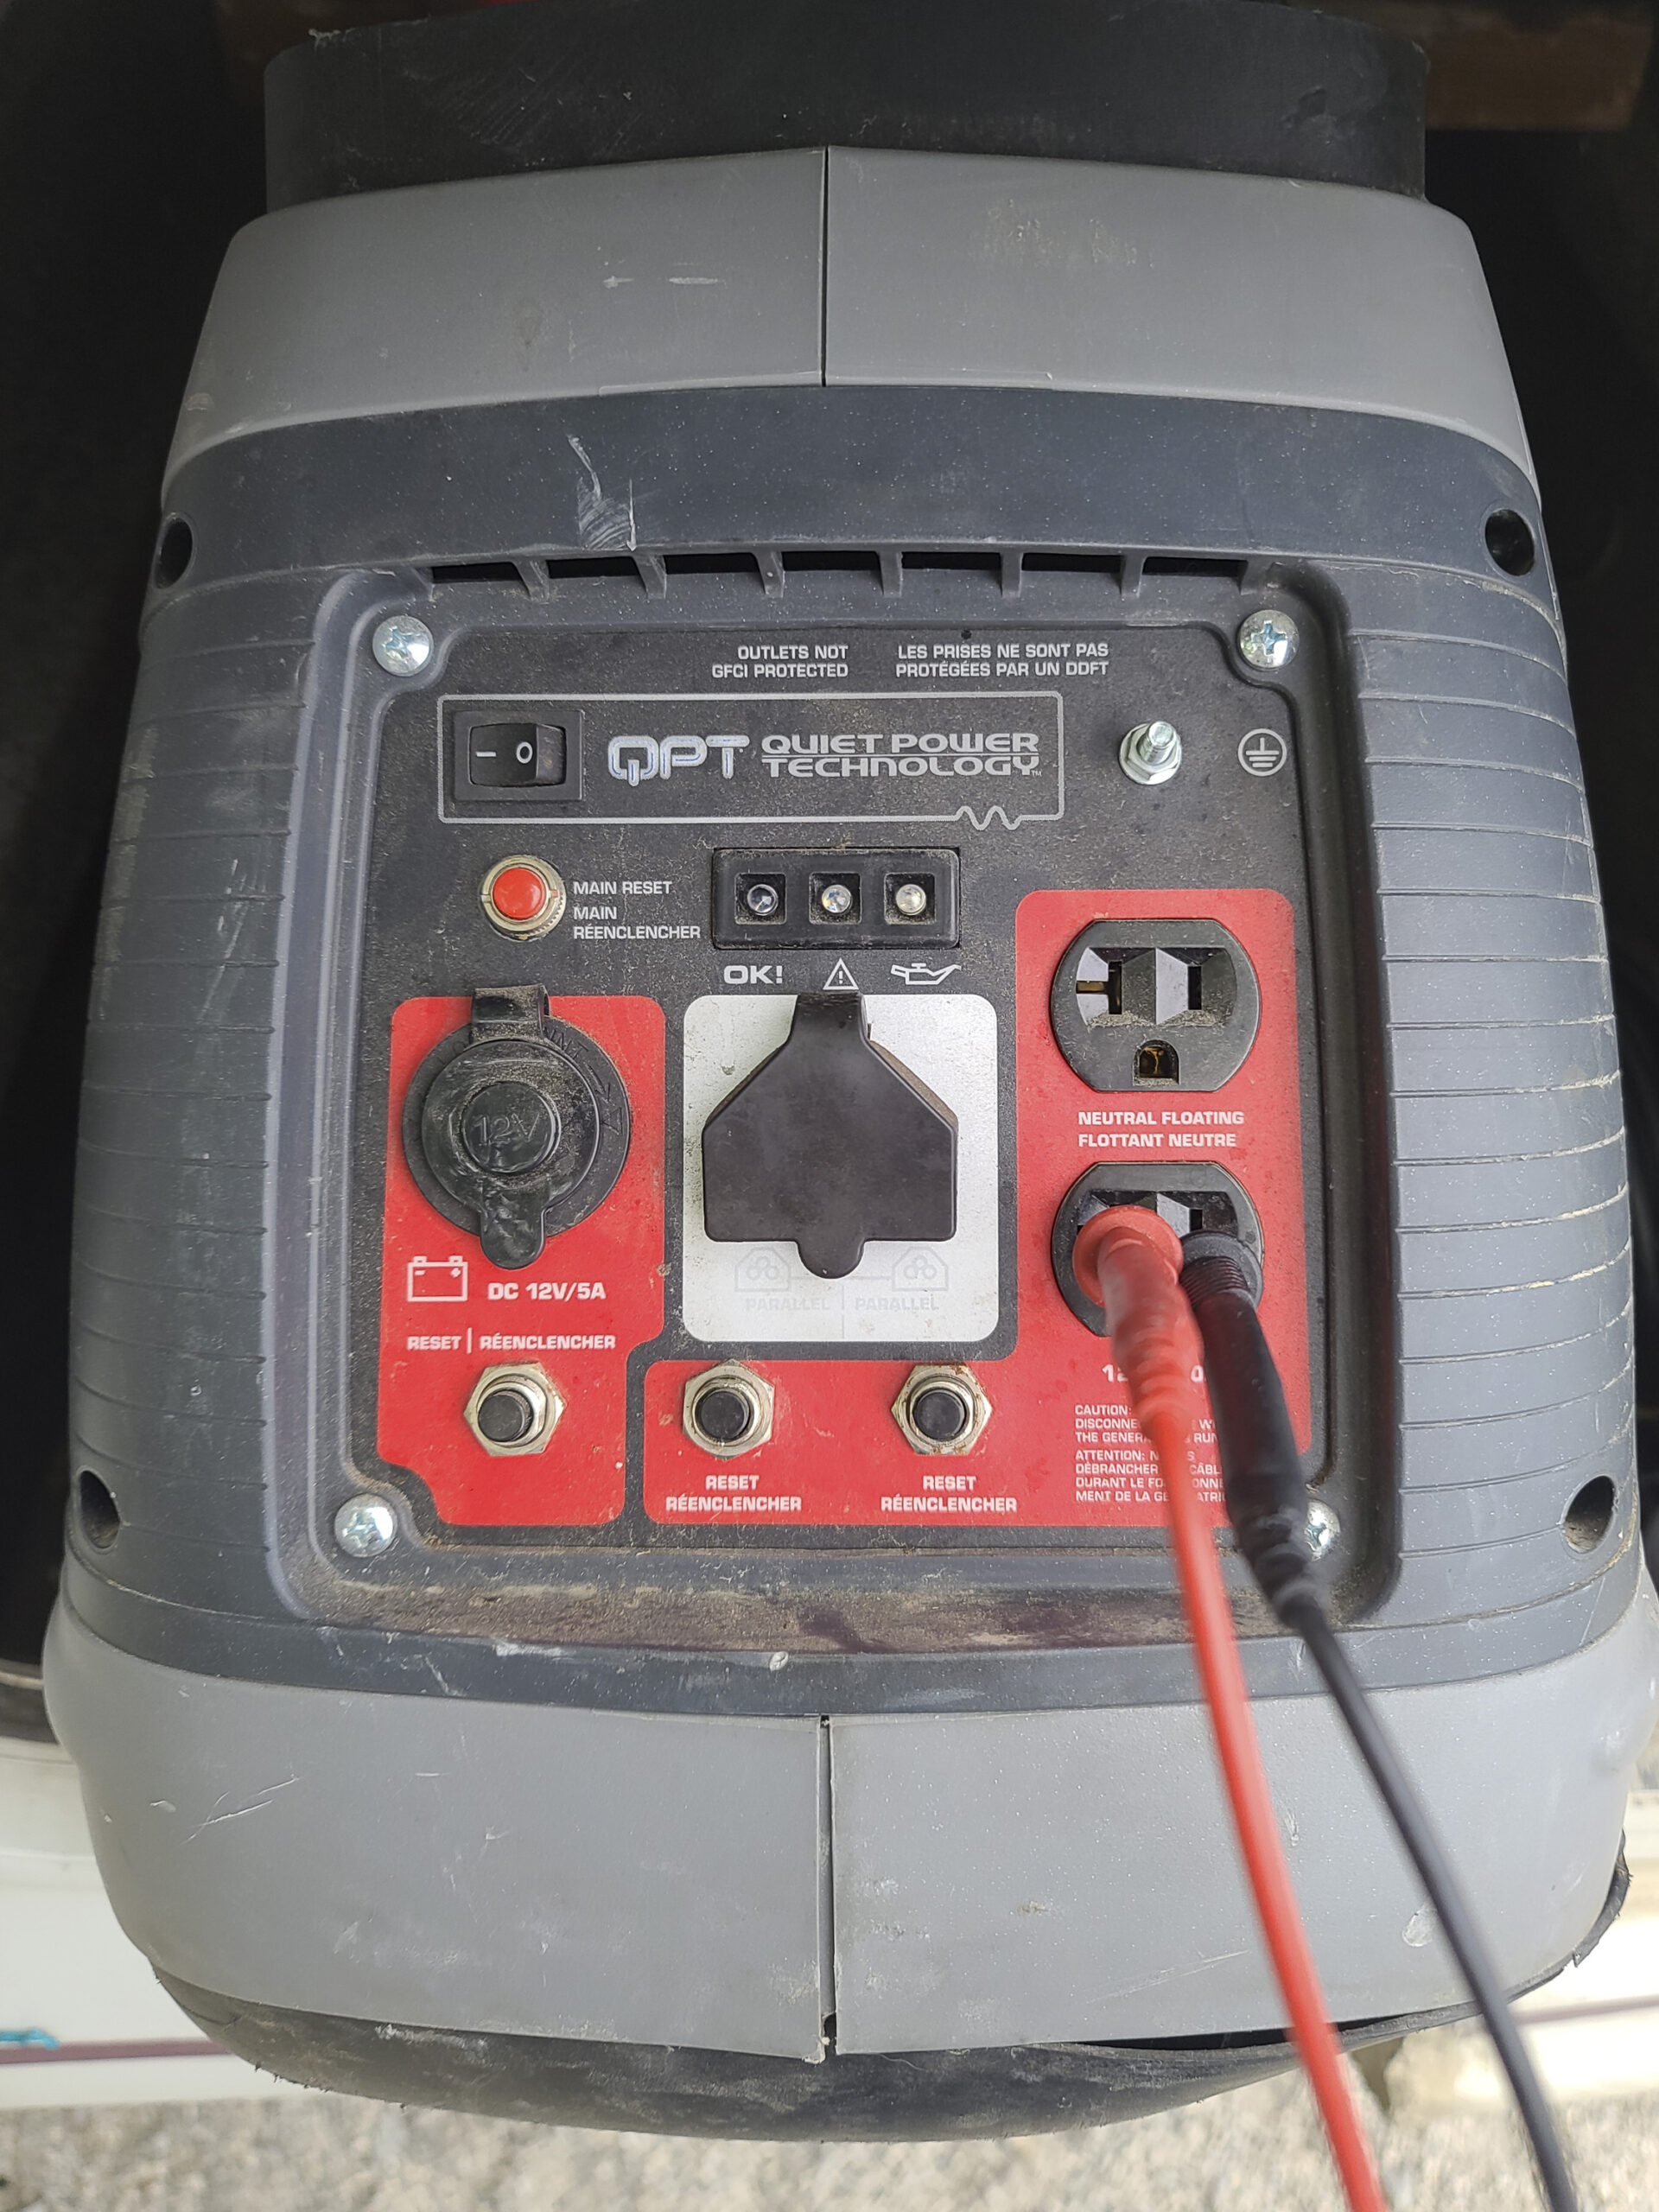 The front of a generator, showing the electrical connections and circuit breakers.